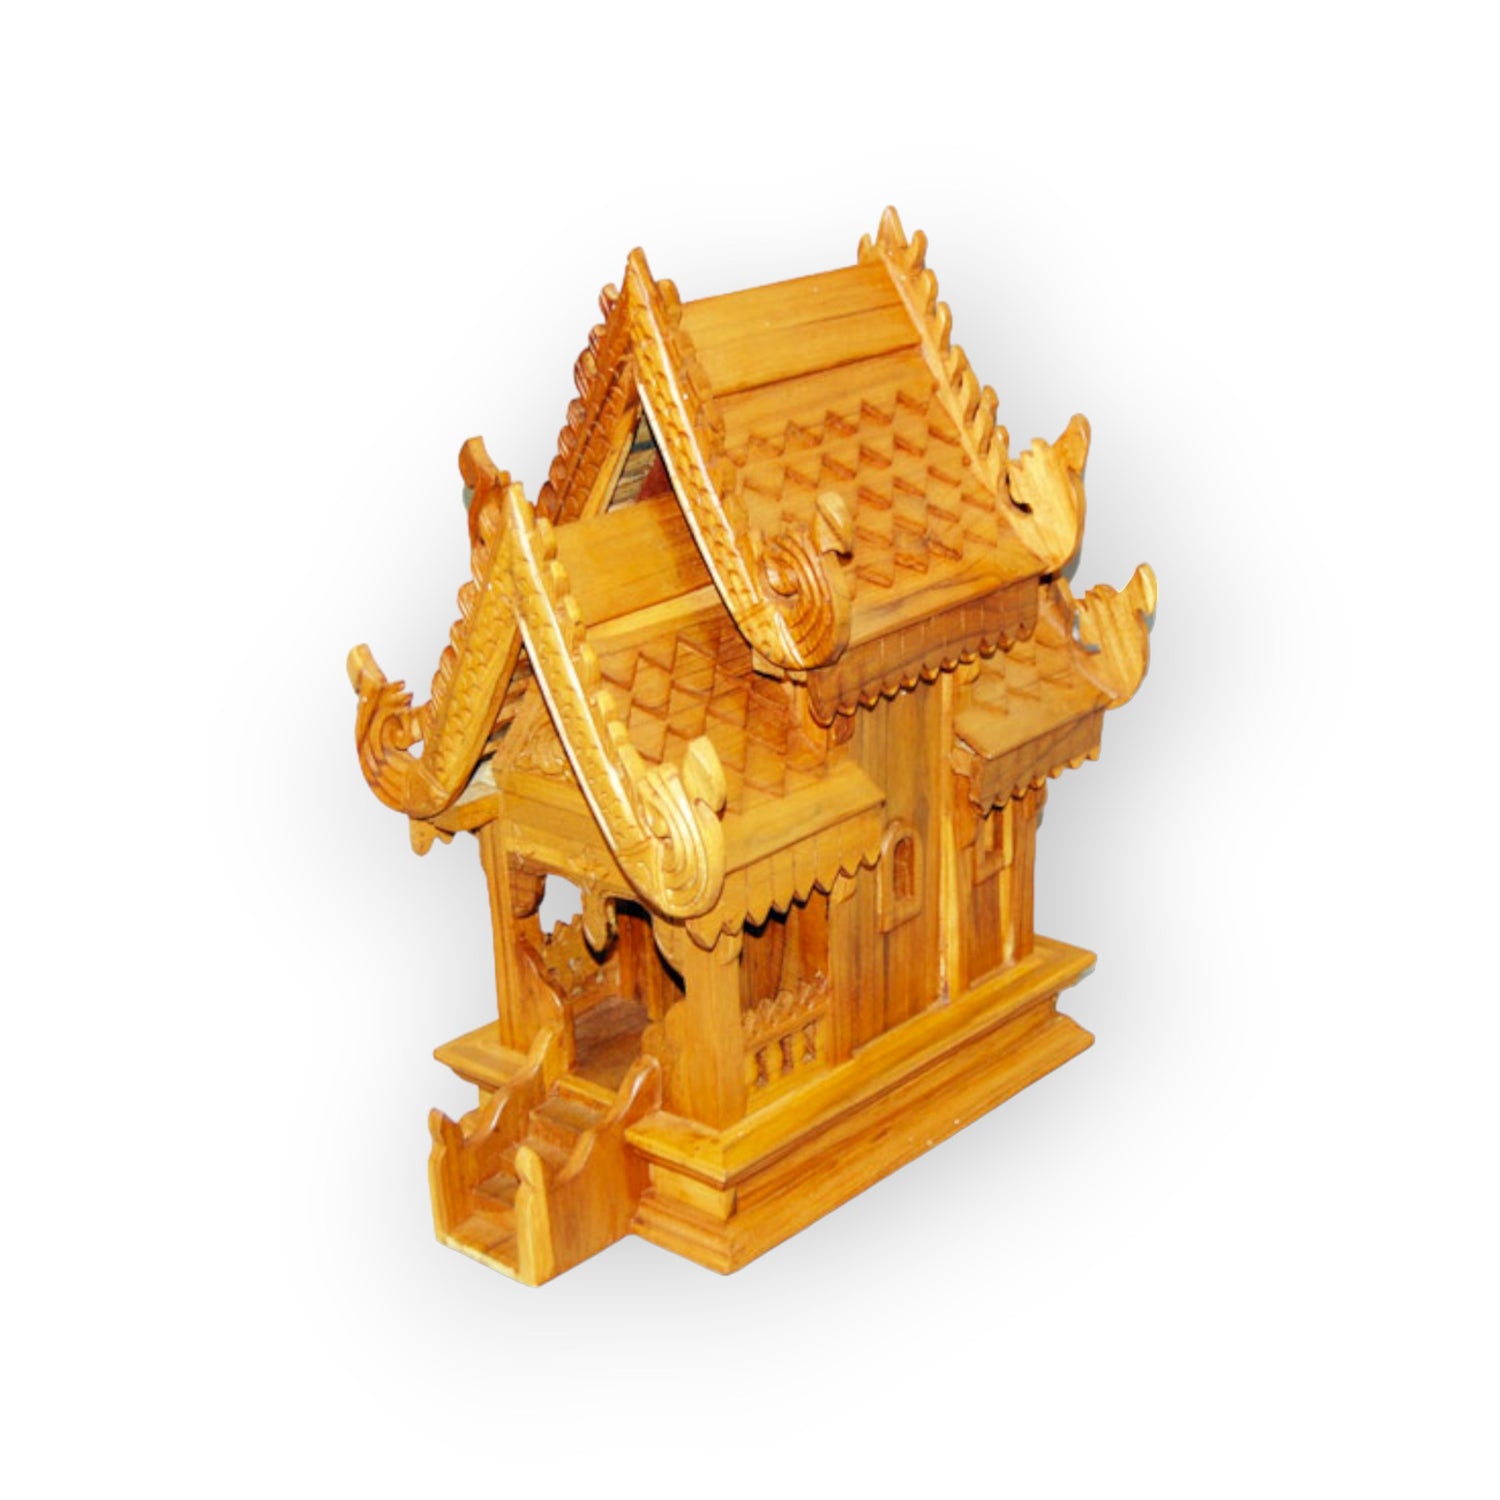 Thai Spirit Houses and Accessories